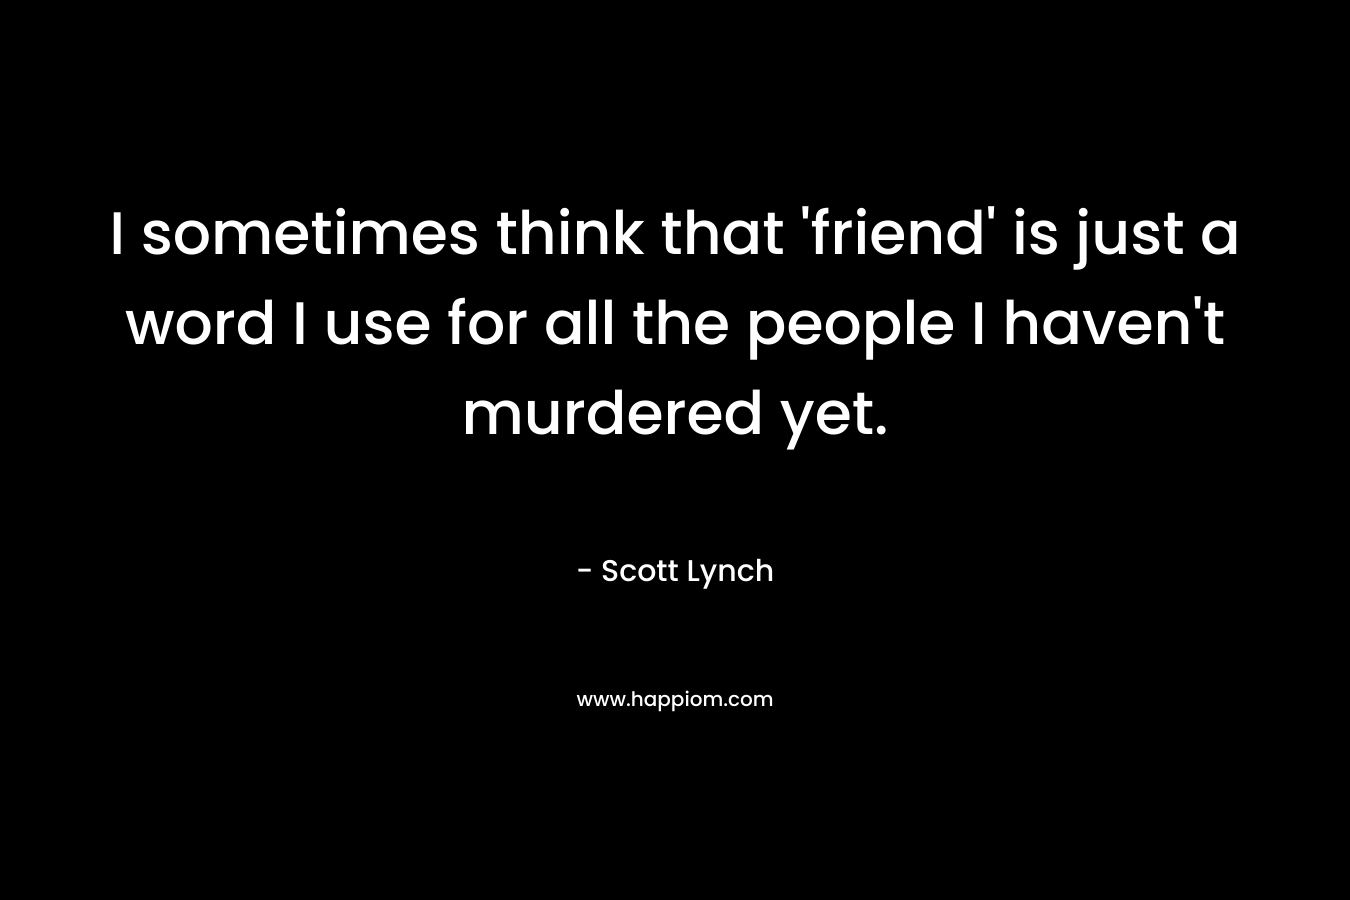 I sometimes think that 'friend' is just a word I use for all the people I haven't murdered yet.